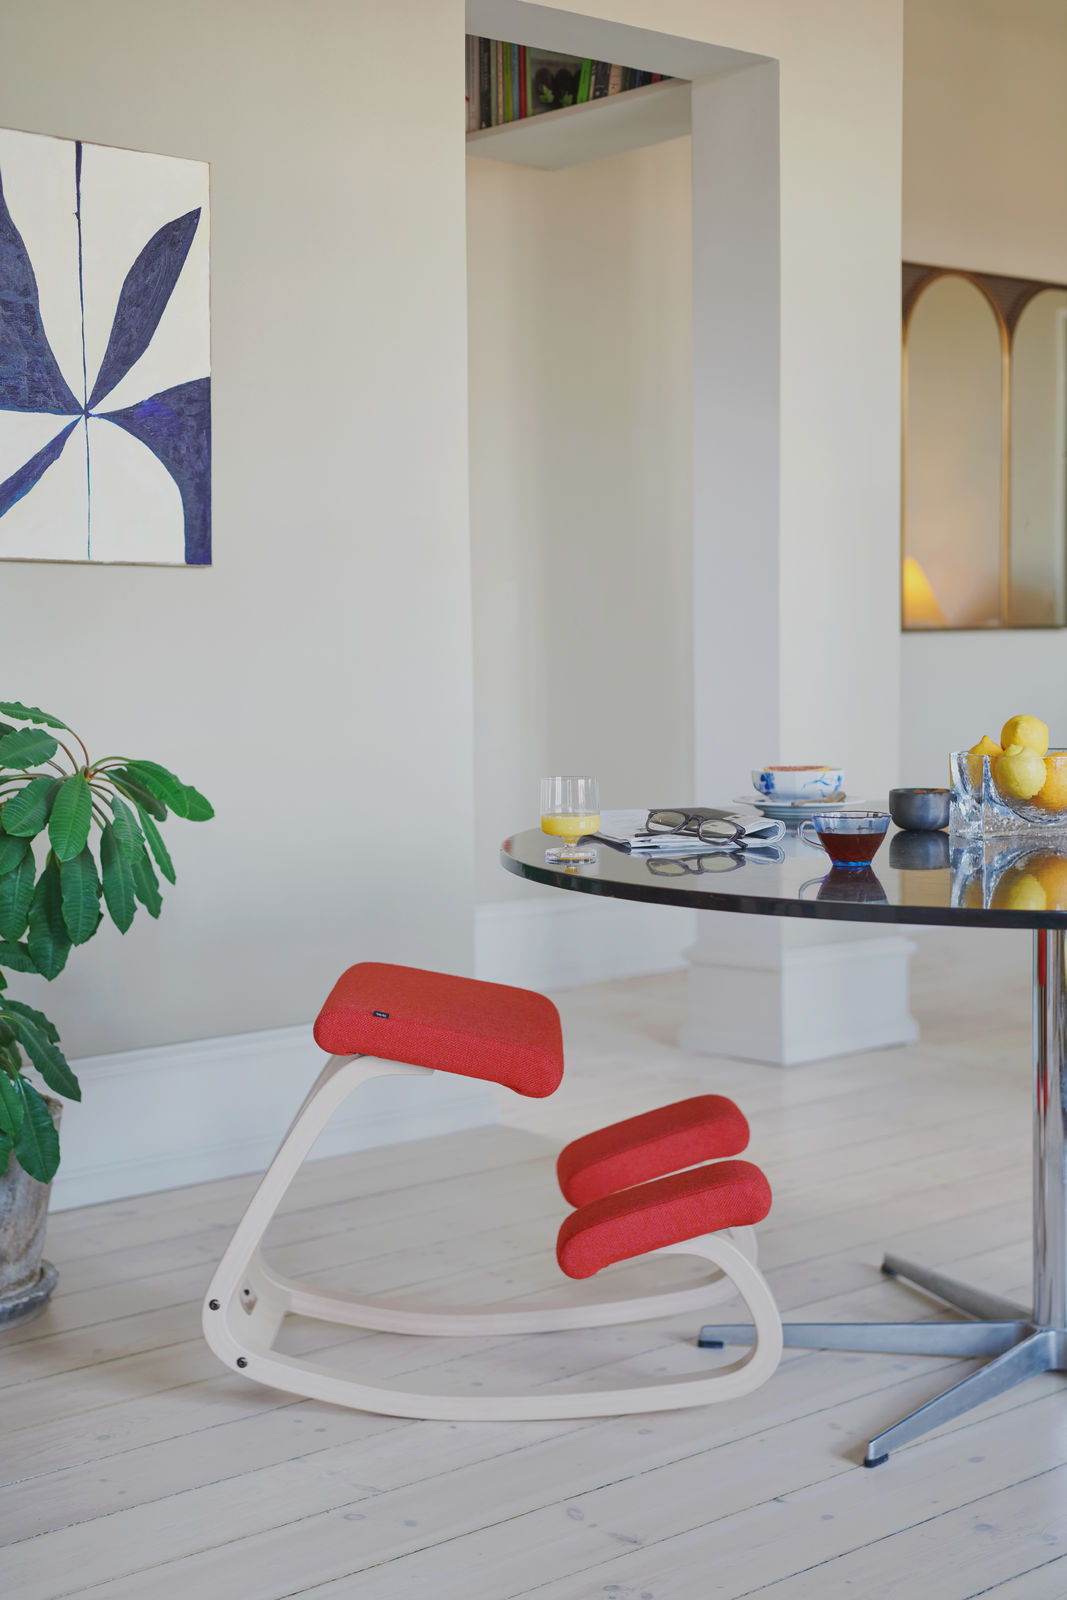 Variable Plus Chair by Varier in a Livingroom - Red - Home Usage